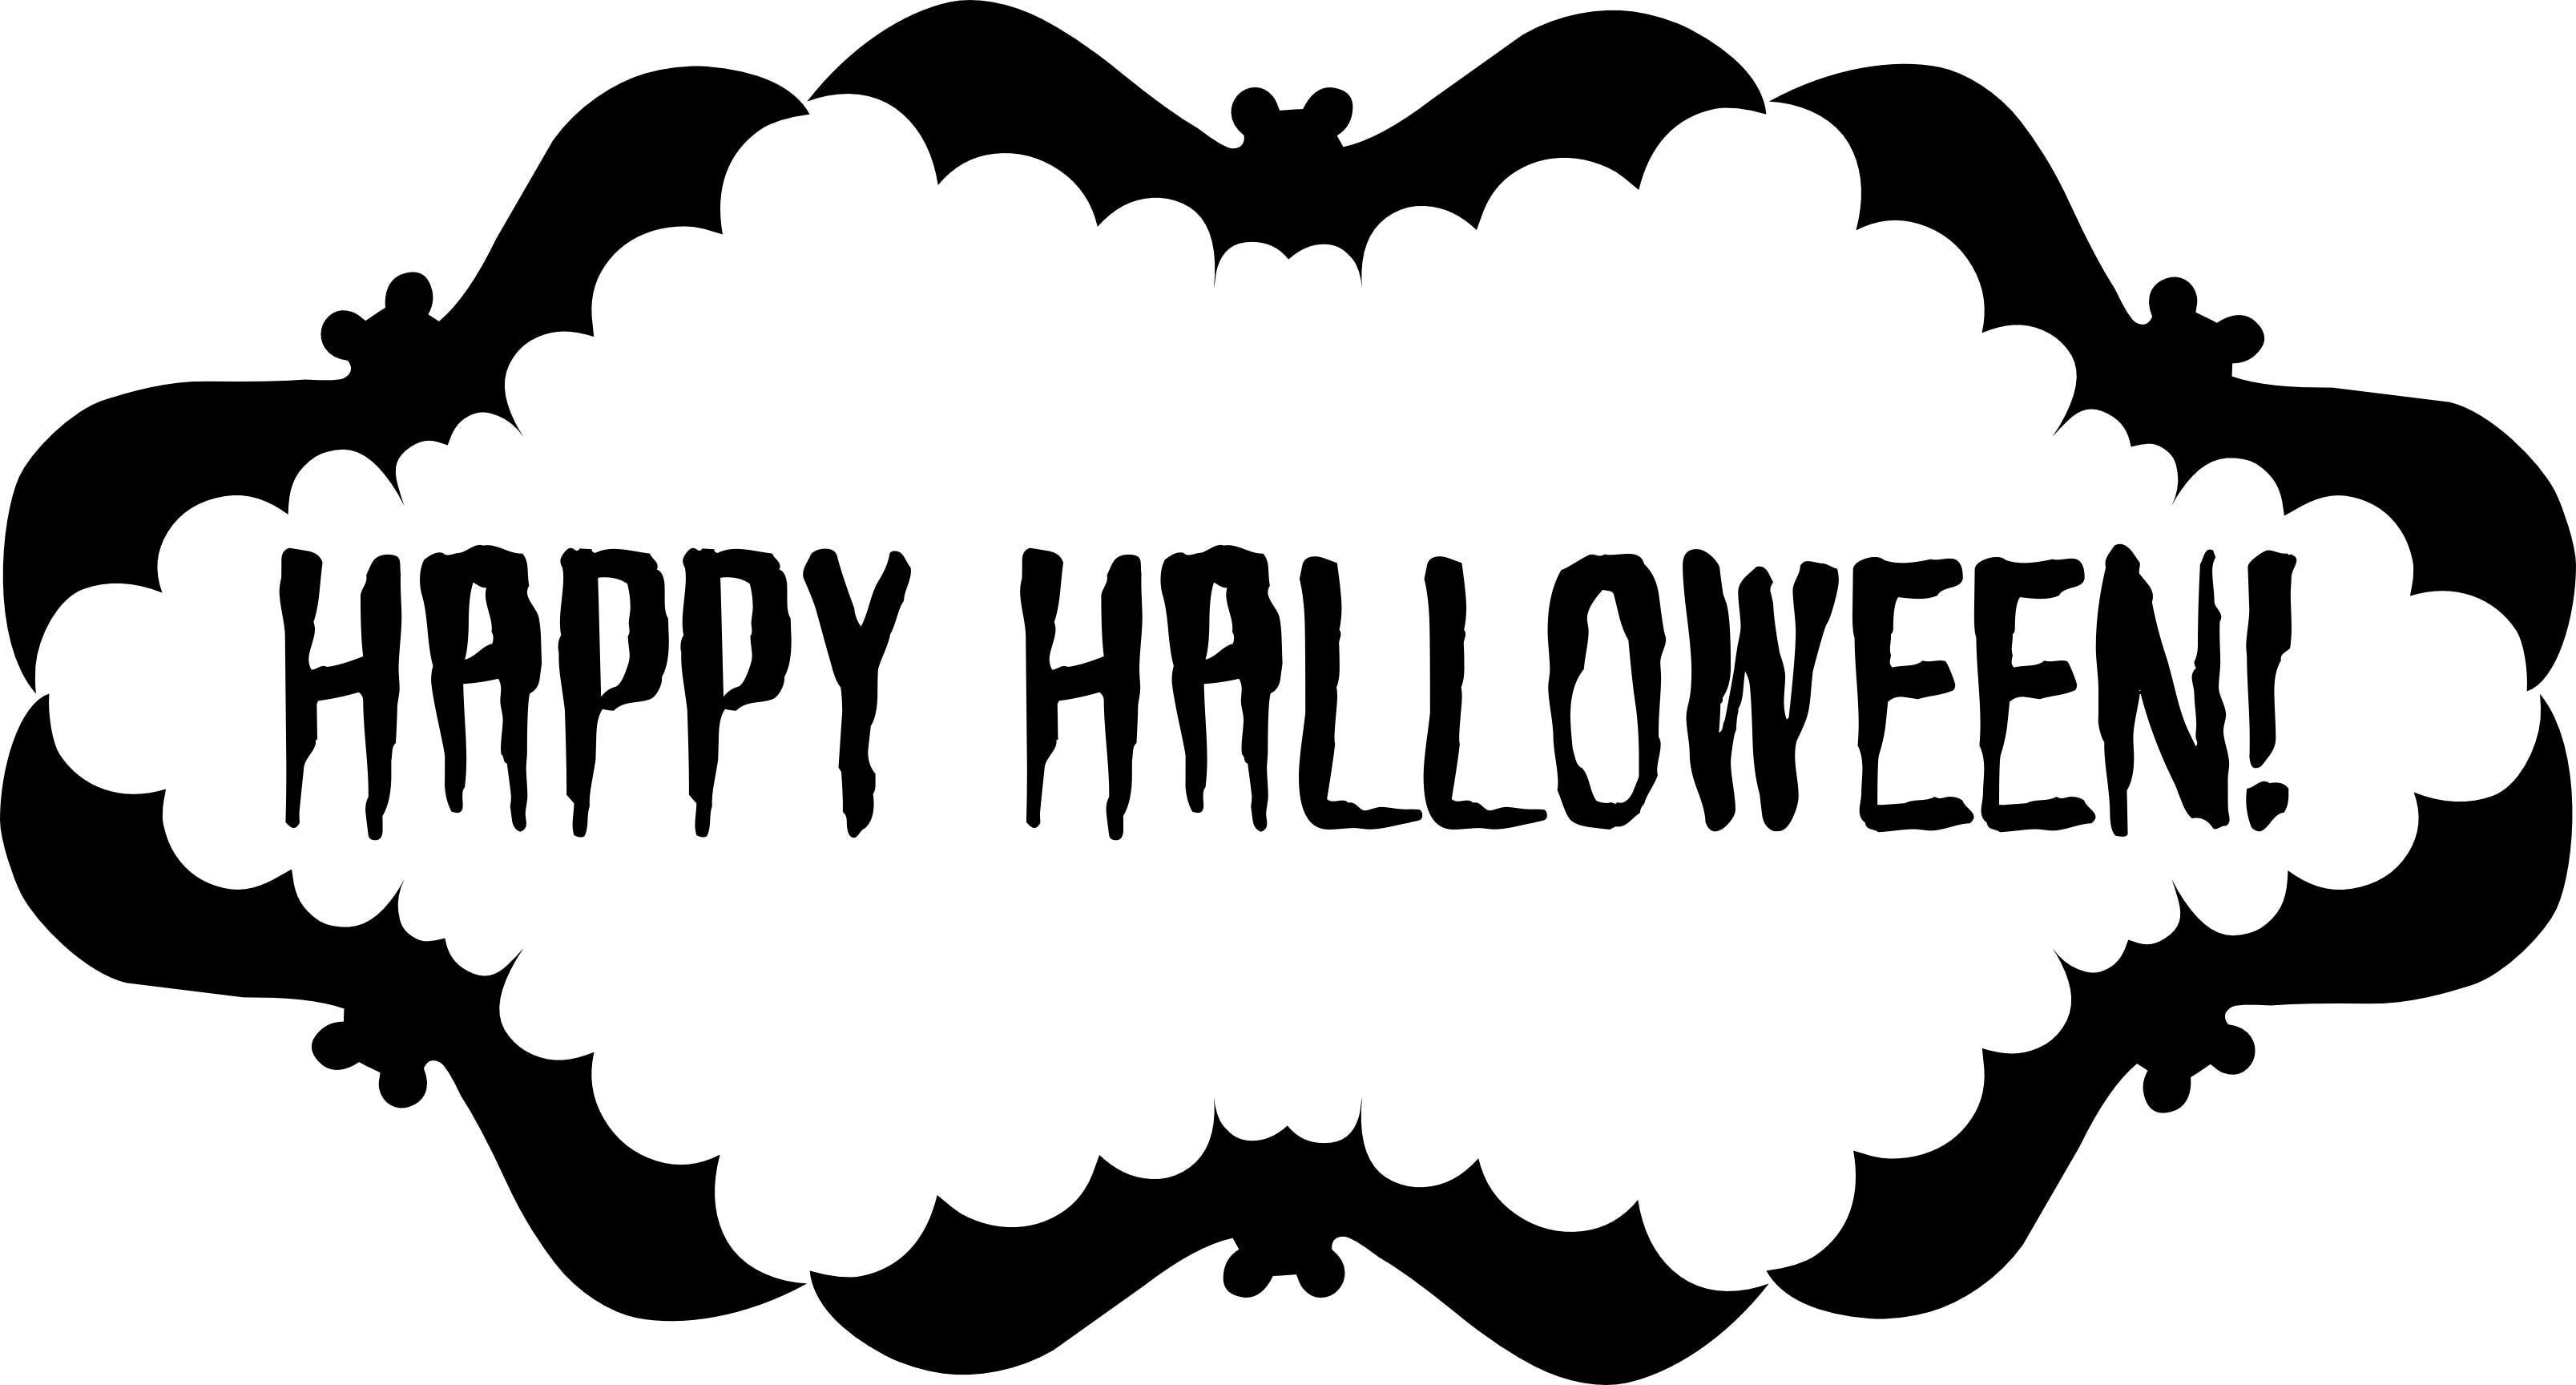 Printable Halloween Decorations Template - Here Comes Halloween 2018! - Free Printable Halloween Decorations